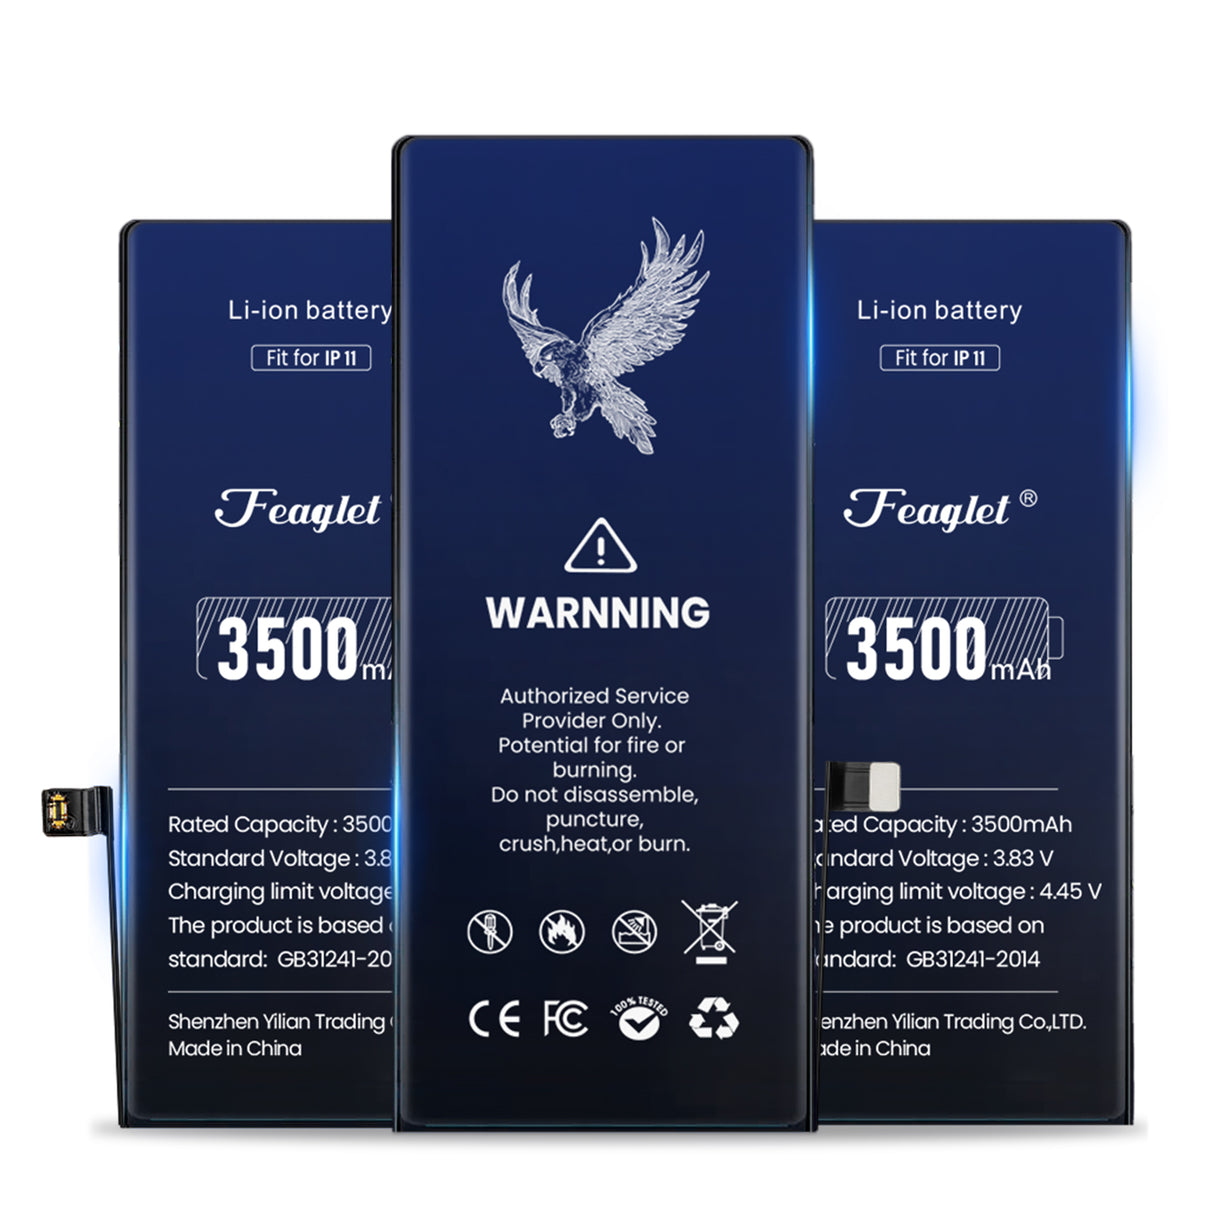 High Capacity iPhone 11 Battery Replacement Original BMS Low Impedance & 800 Cycles Maximum |3500 mAh|-Fly Eagle Feaglet Battery